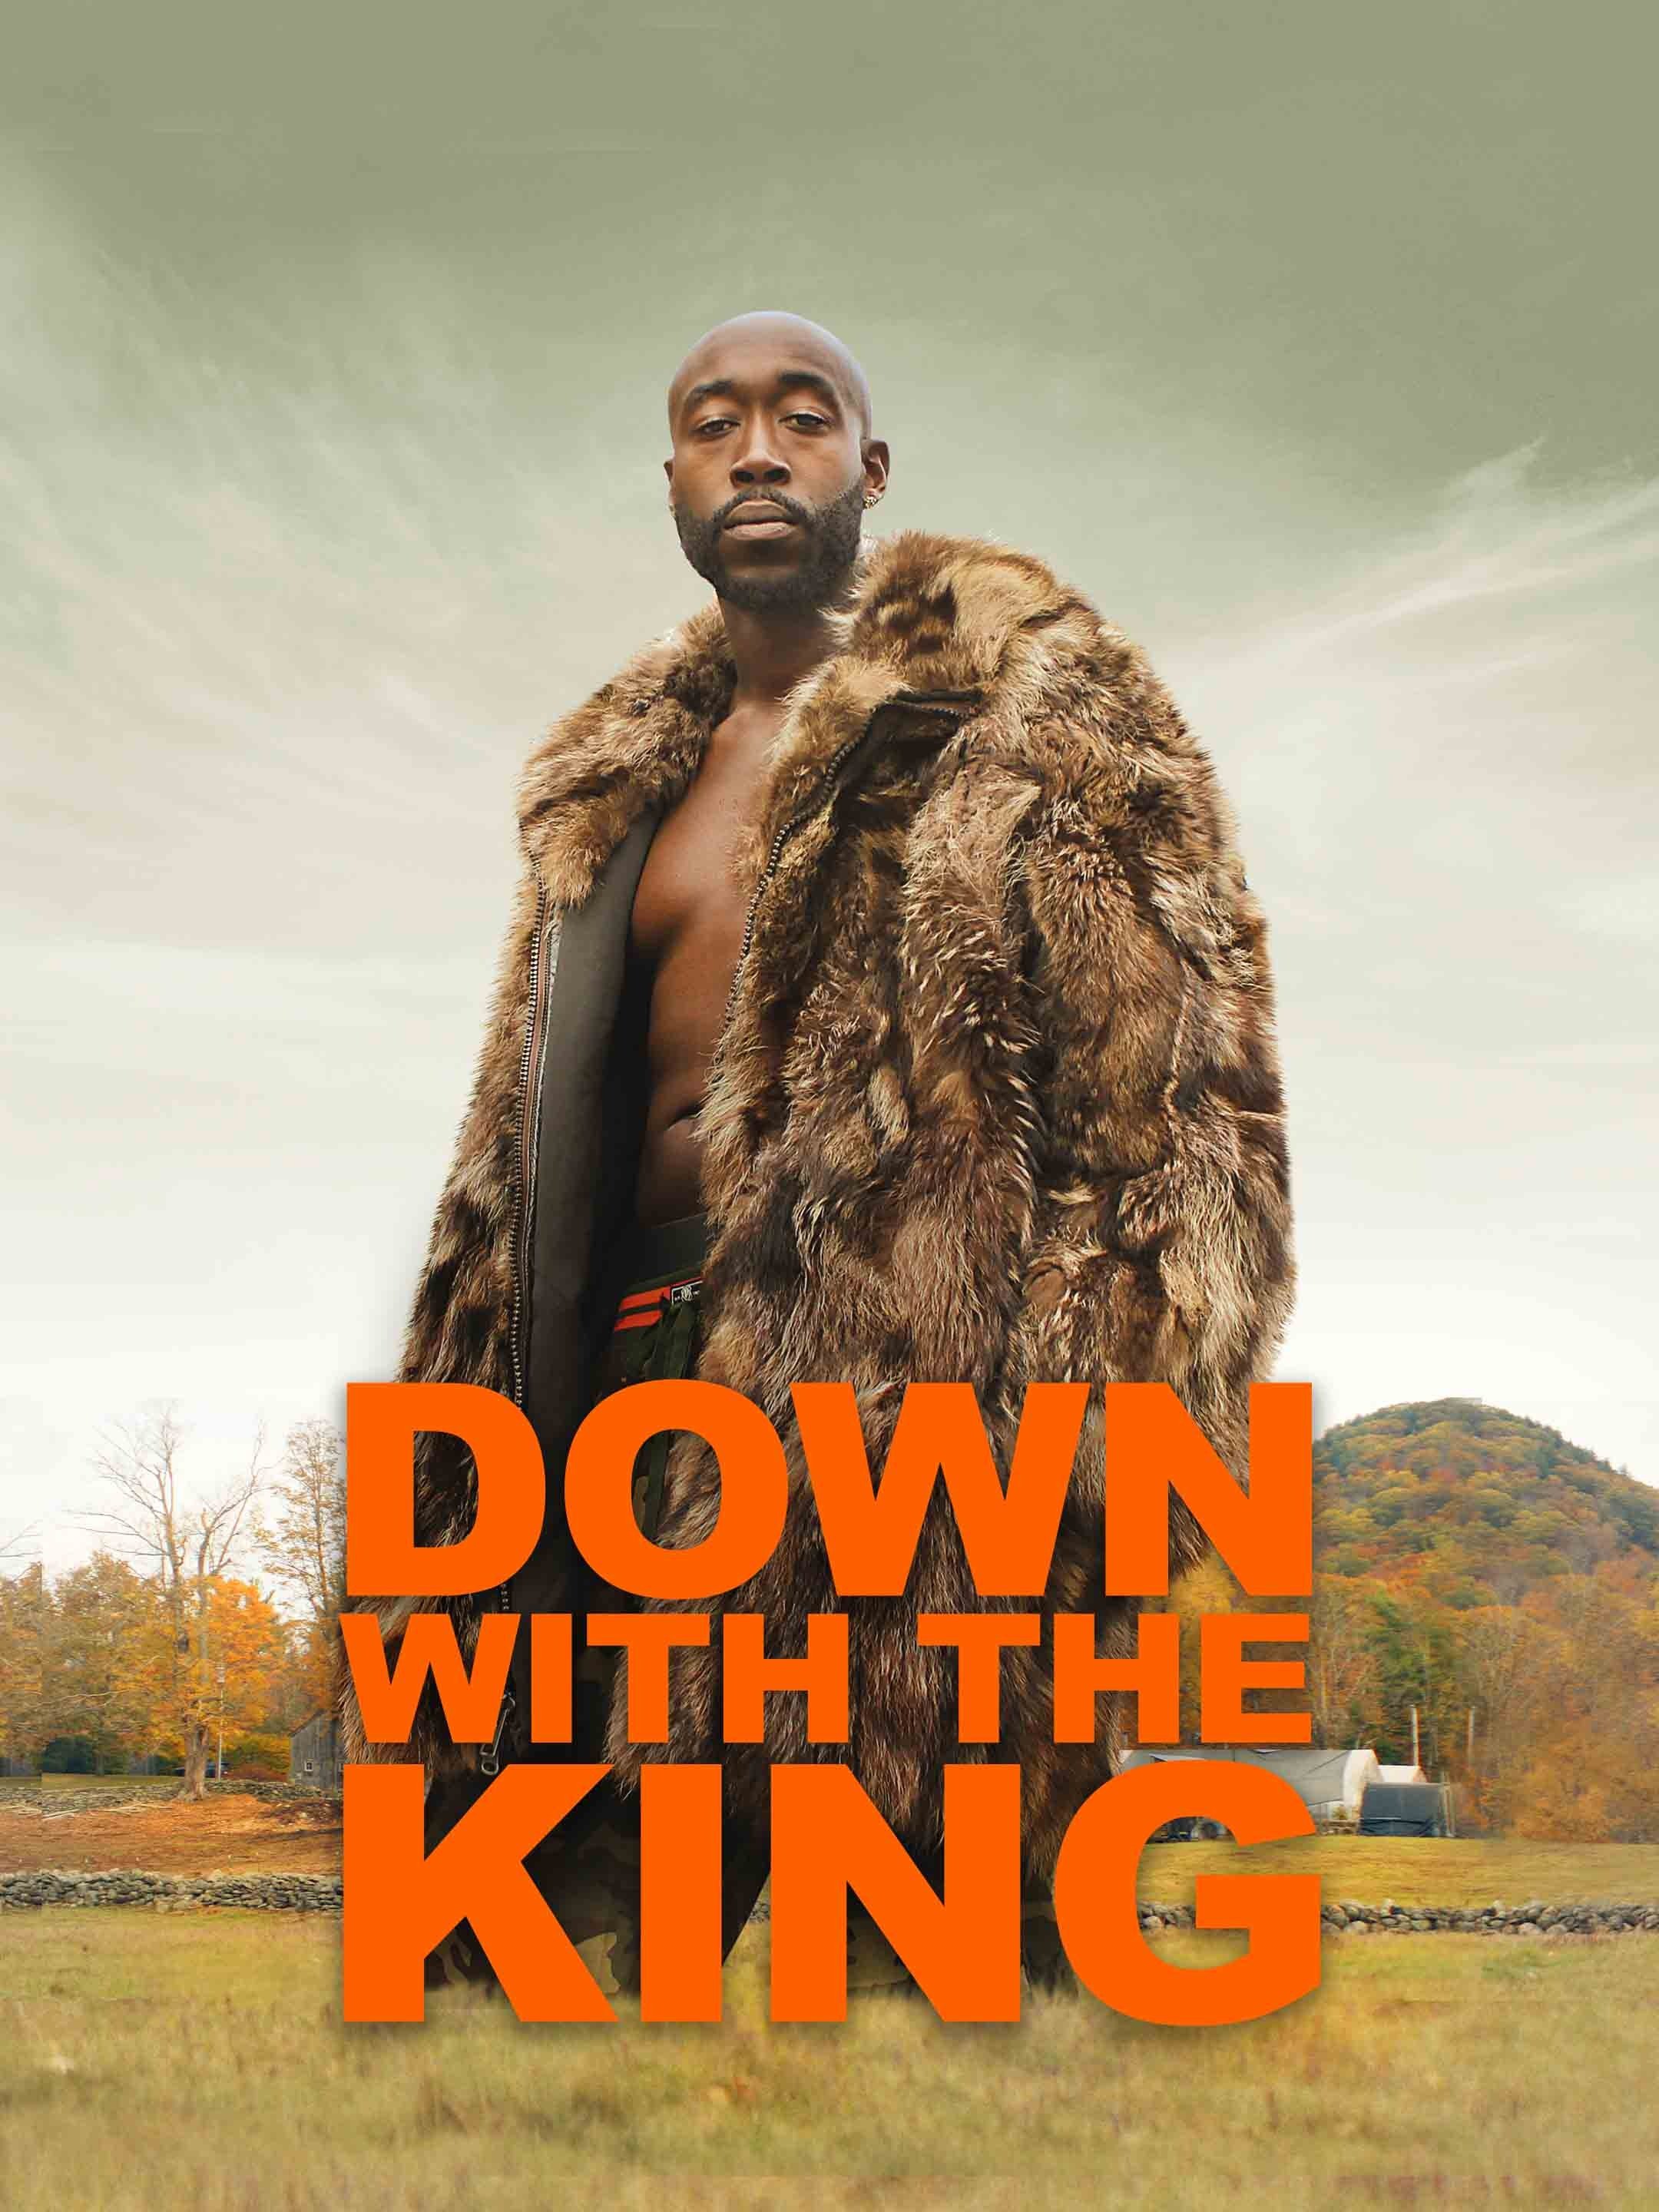 down with the king movie review